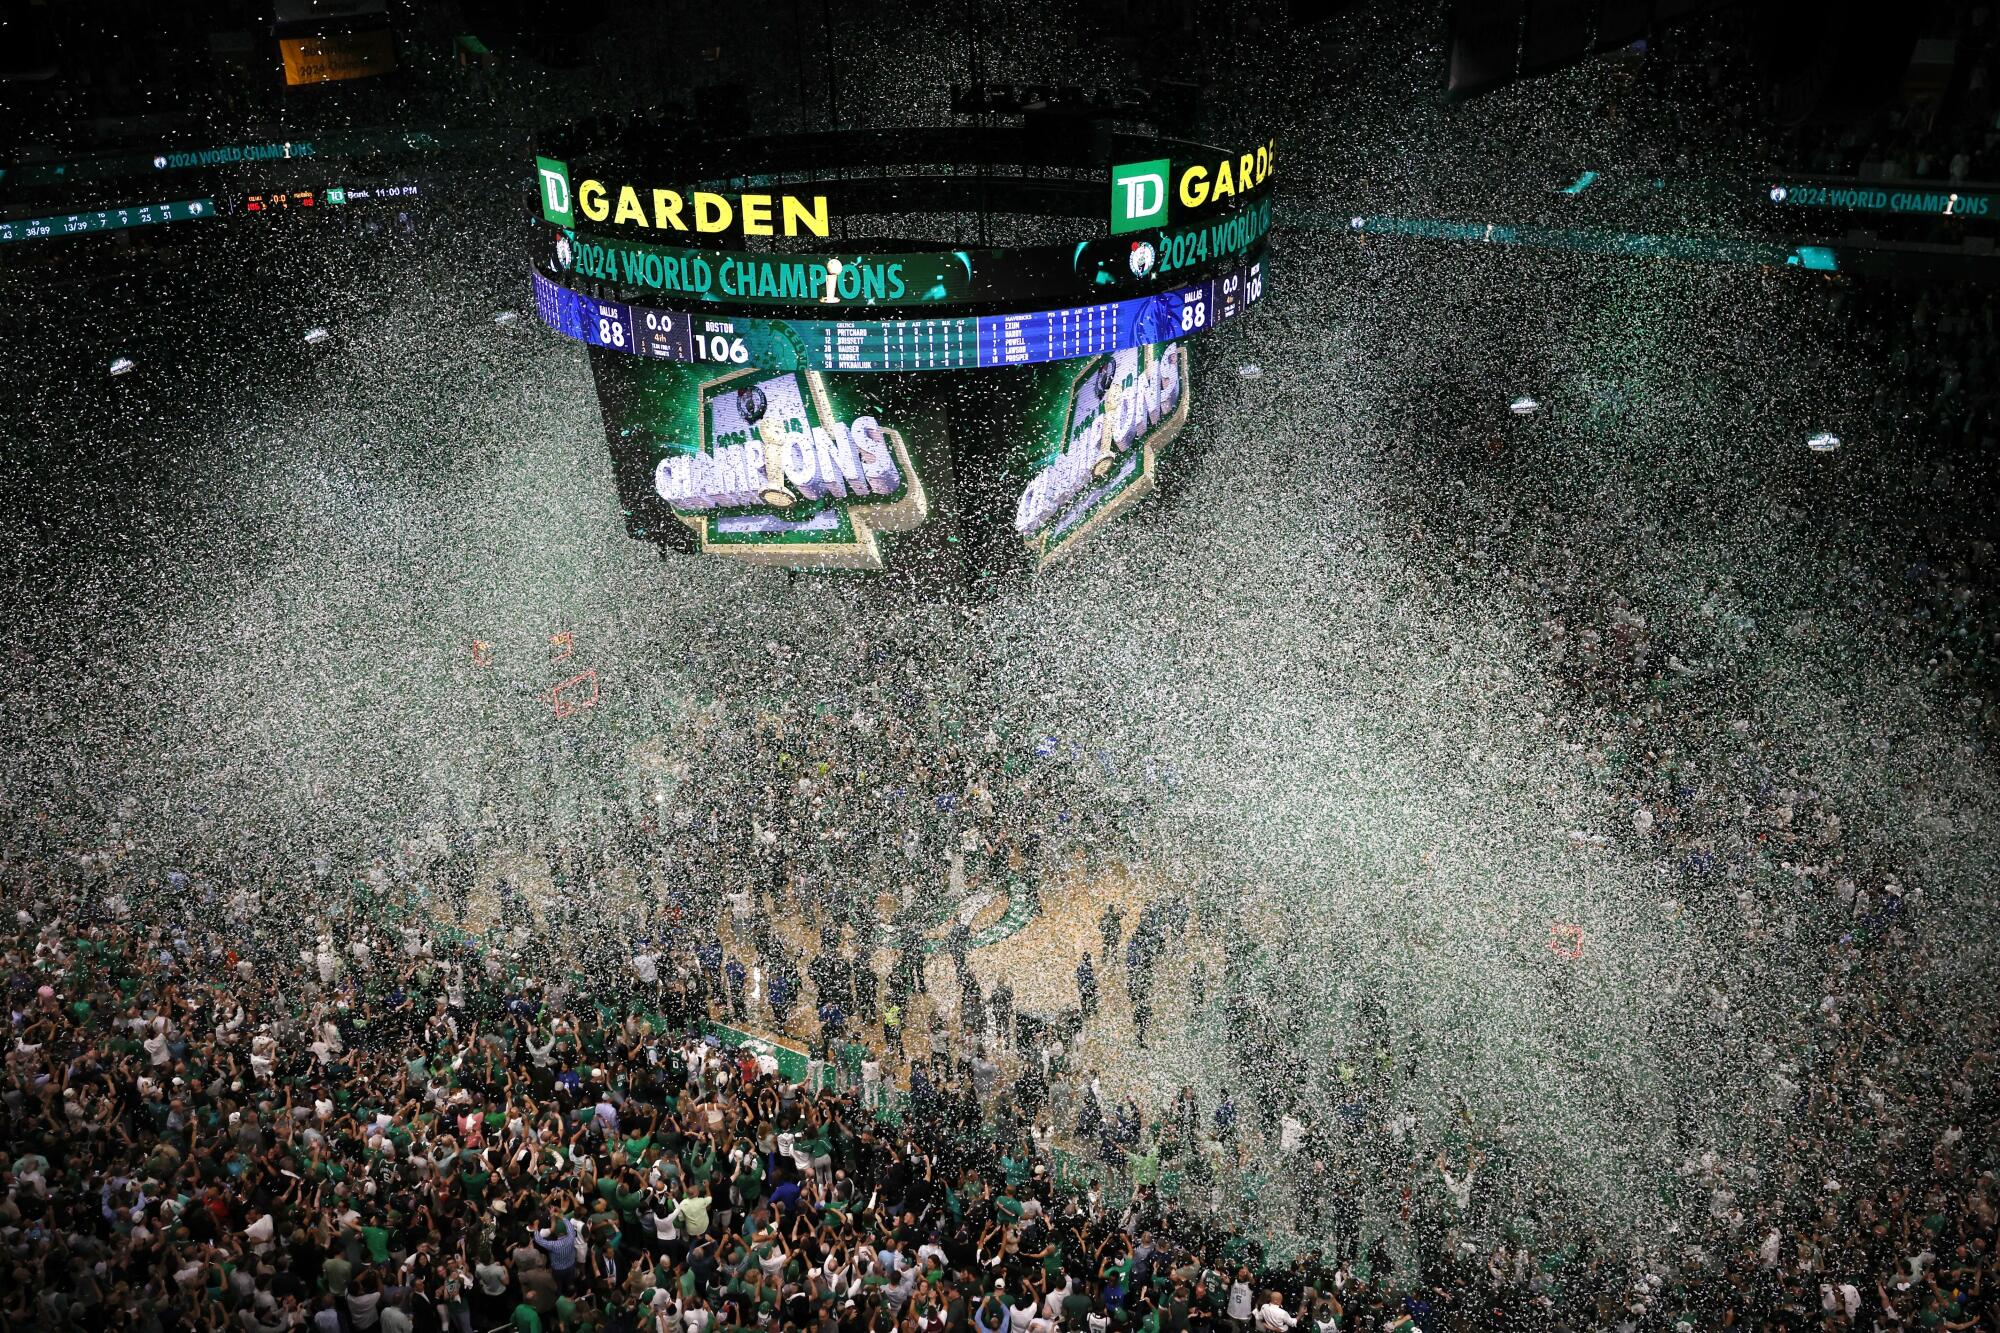 Fans and players celebrate at TD Garden in Boston after the Celtics' NBA championship win.